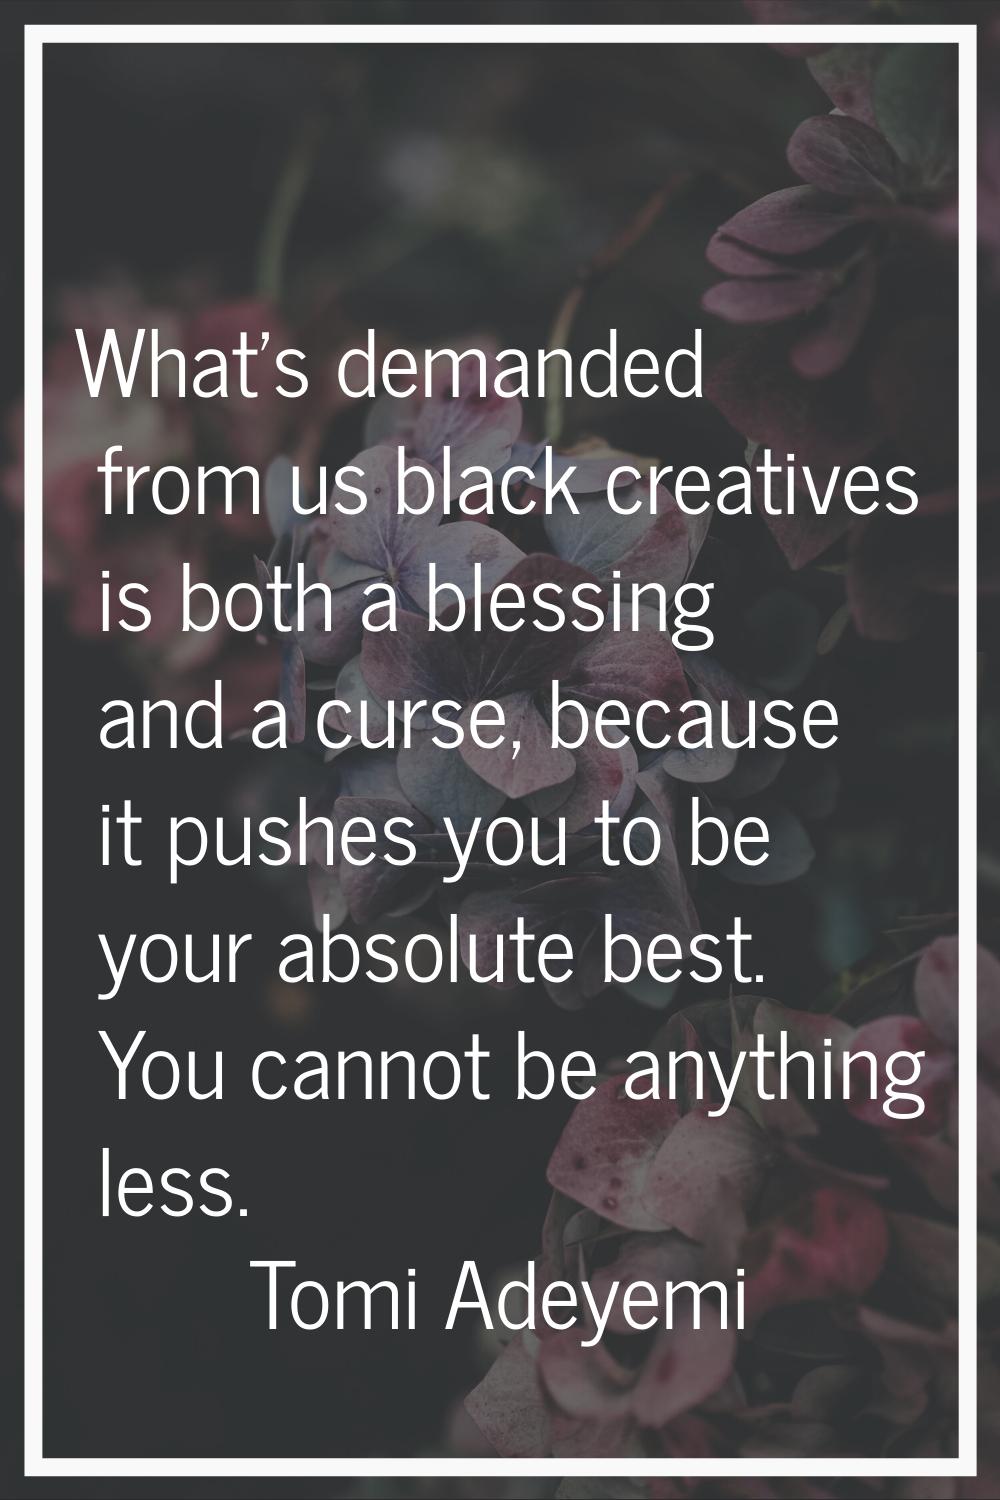 What's demanded from us black creatives is both a blessing and a curse, because it pushes you to be